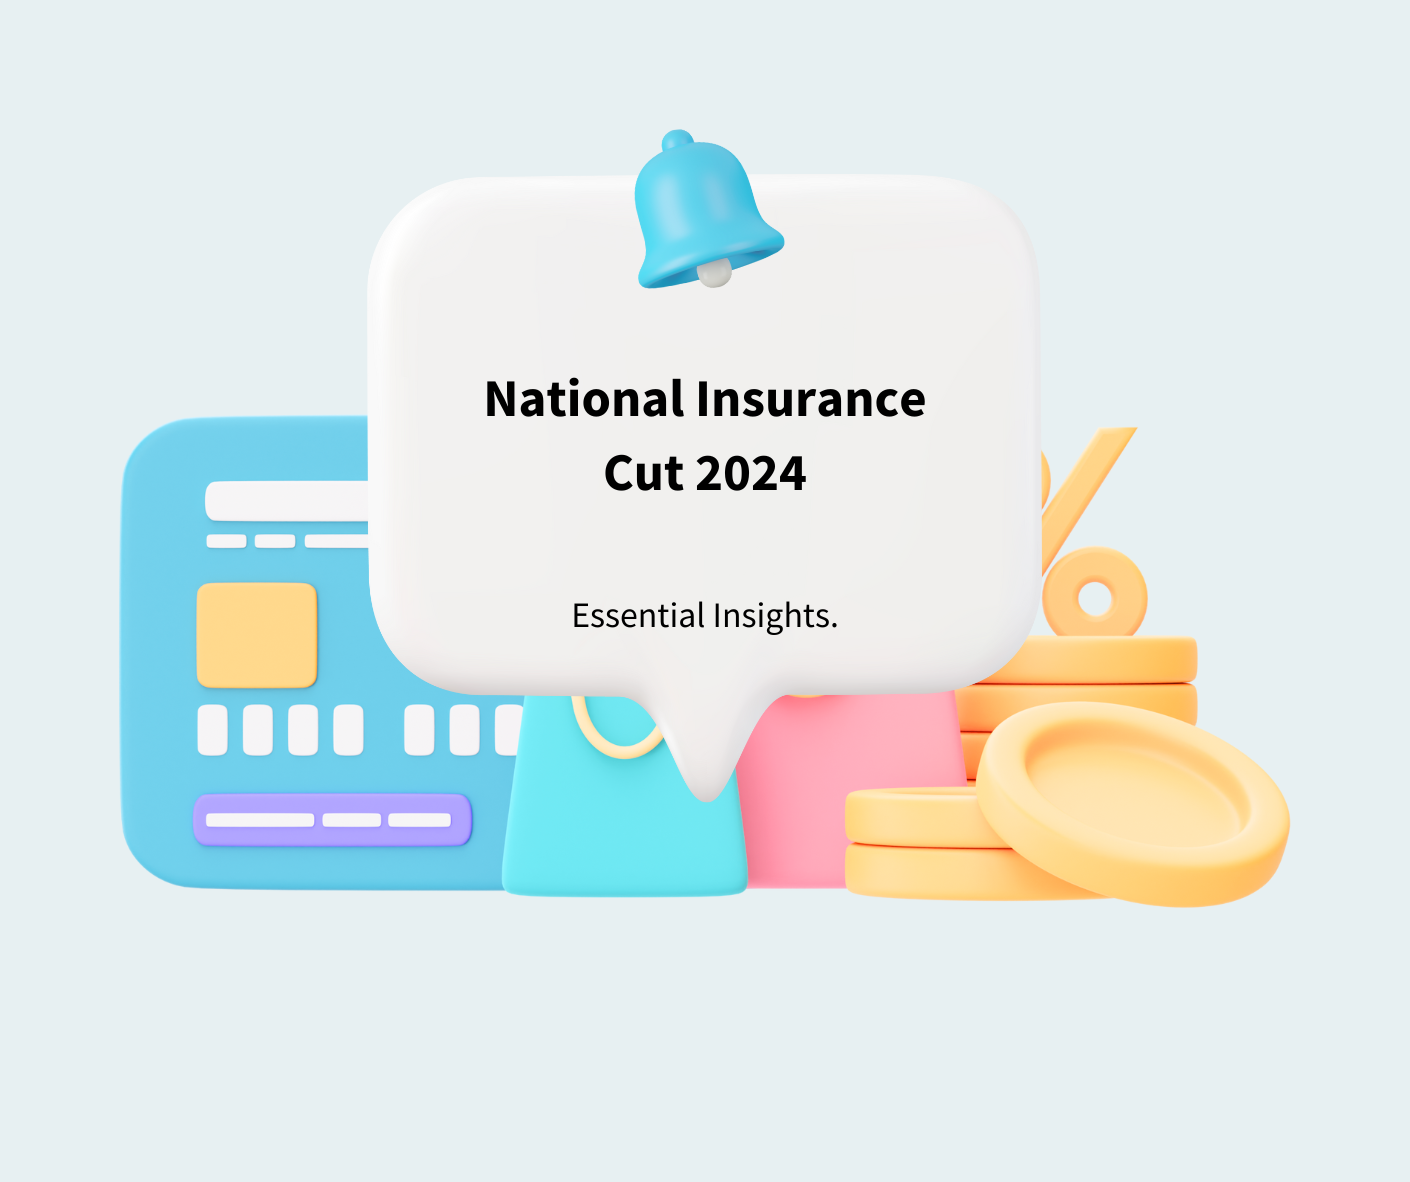 National Insurance Cut 2024. Essential Insights.